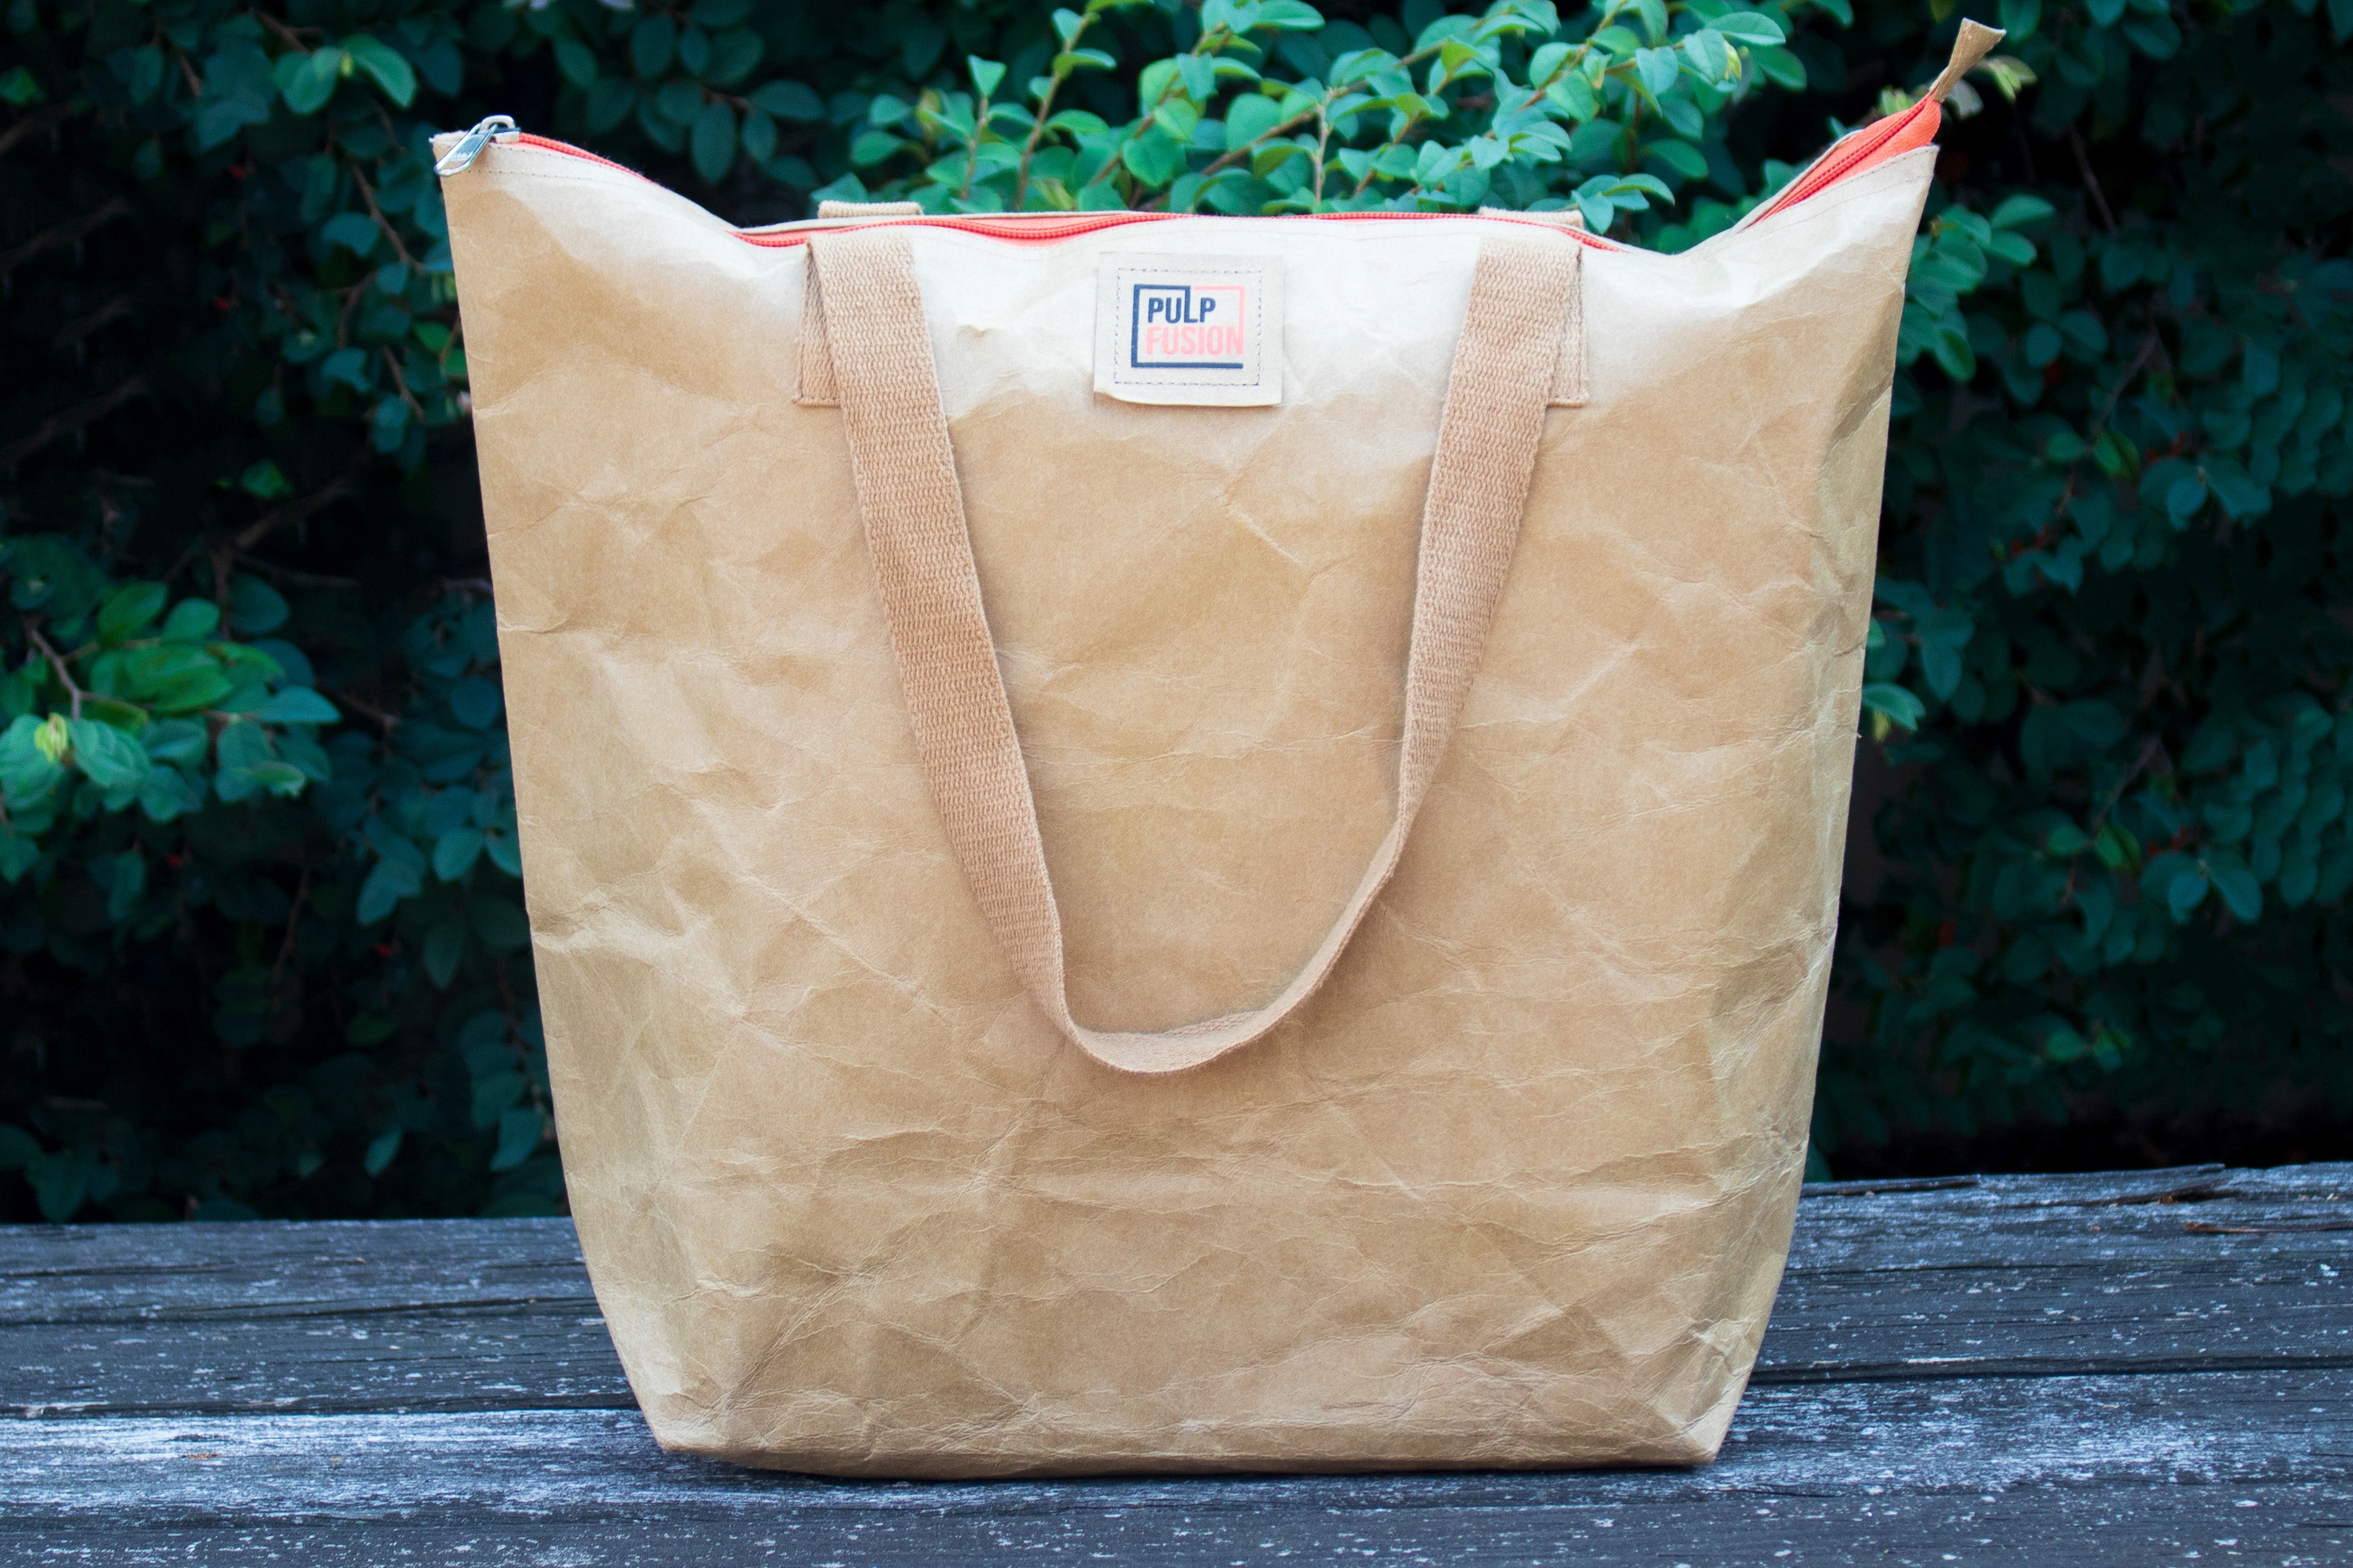 The Essential Tote